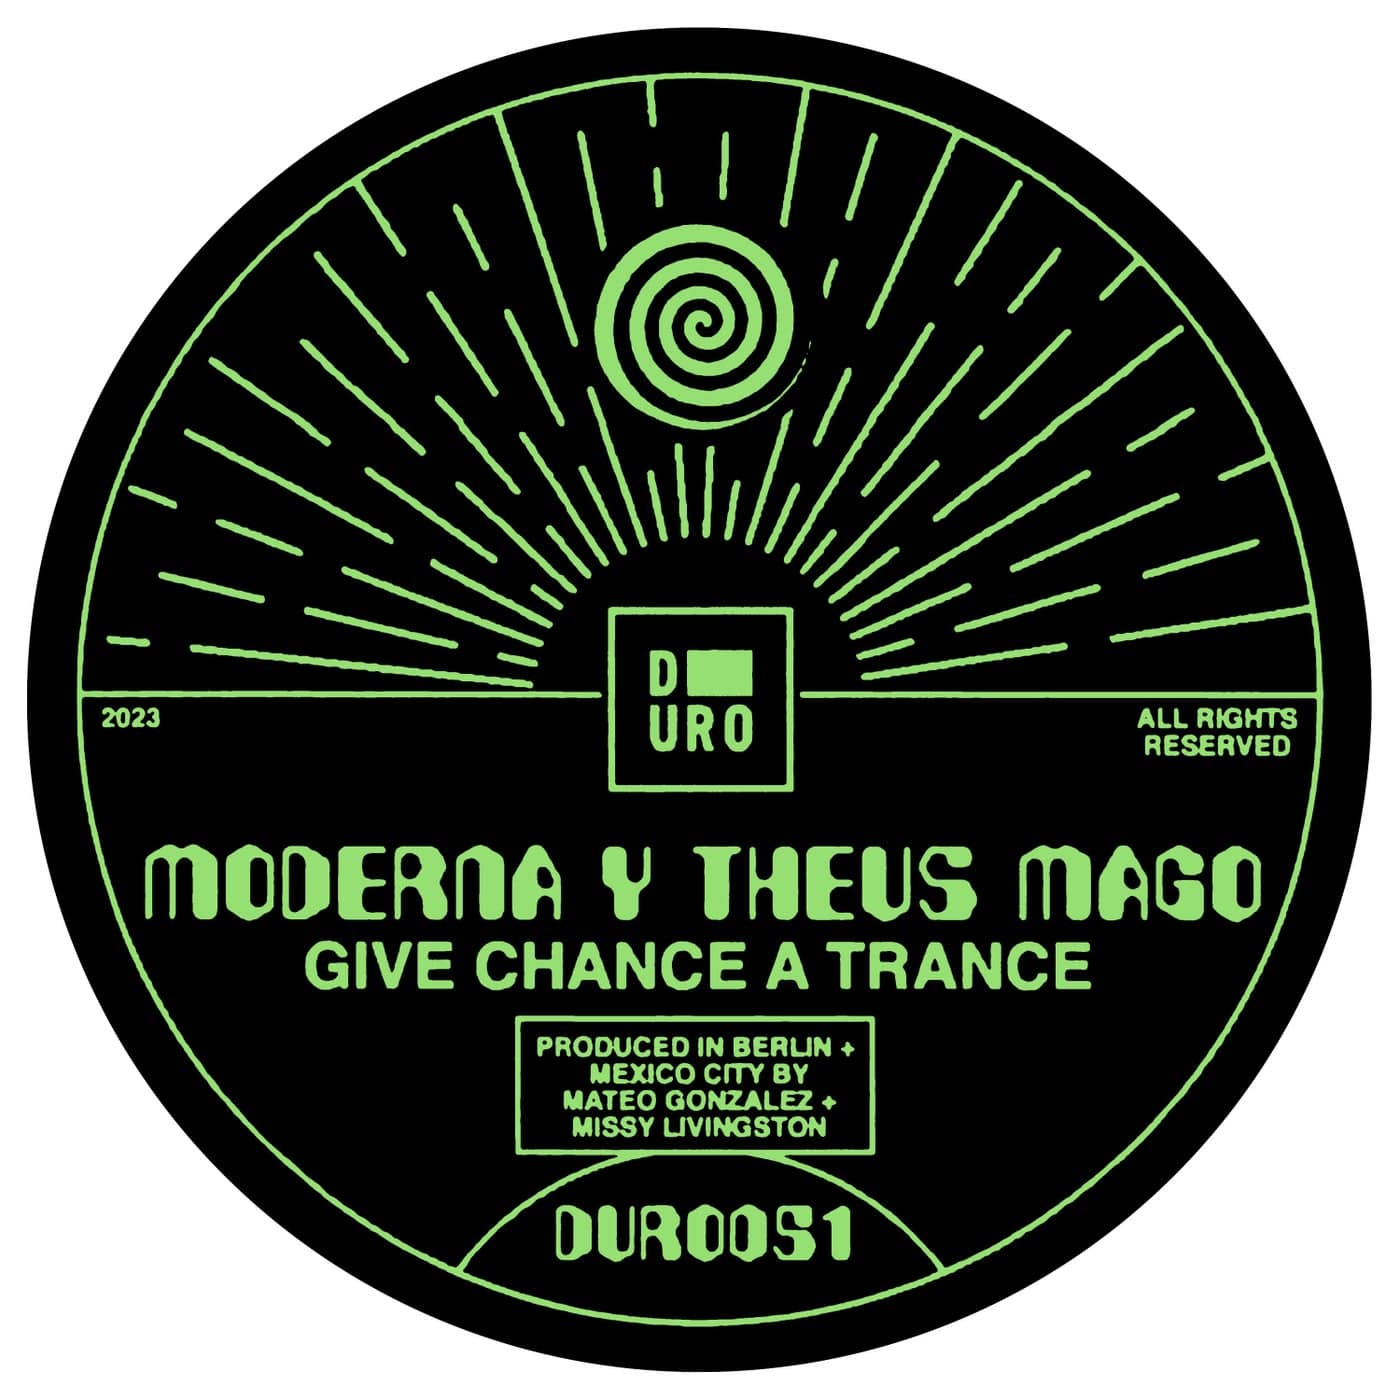 Download Theus Mago, Moderna - Give Chance A Trance on Electrobuzz